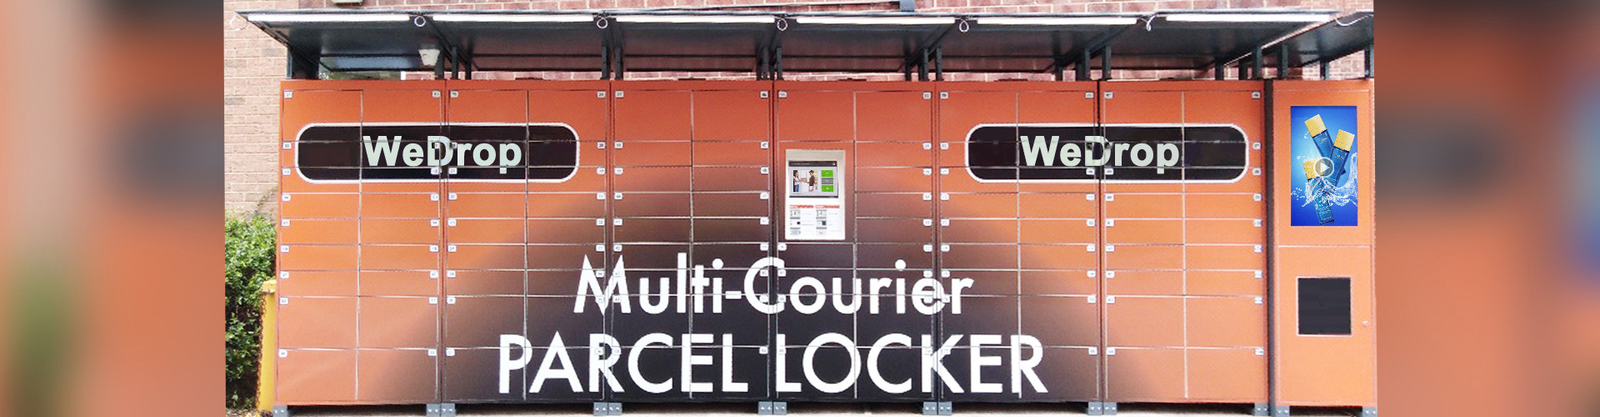 quality Parcel Delivery Lockers factory